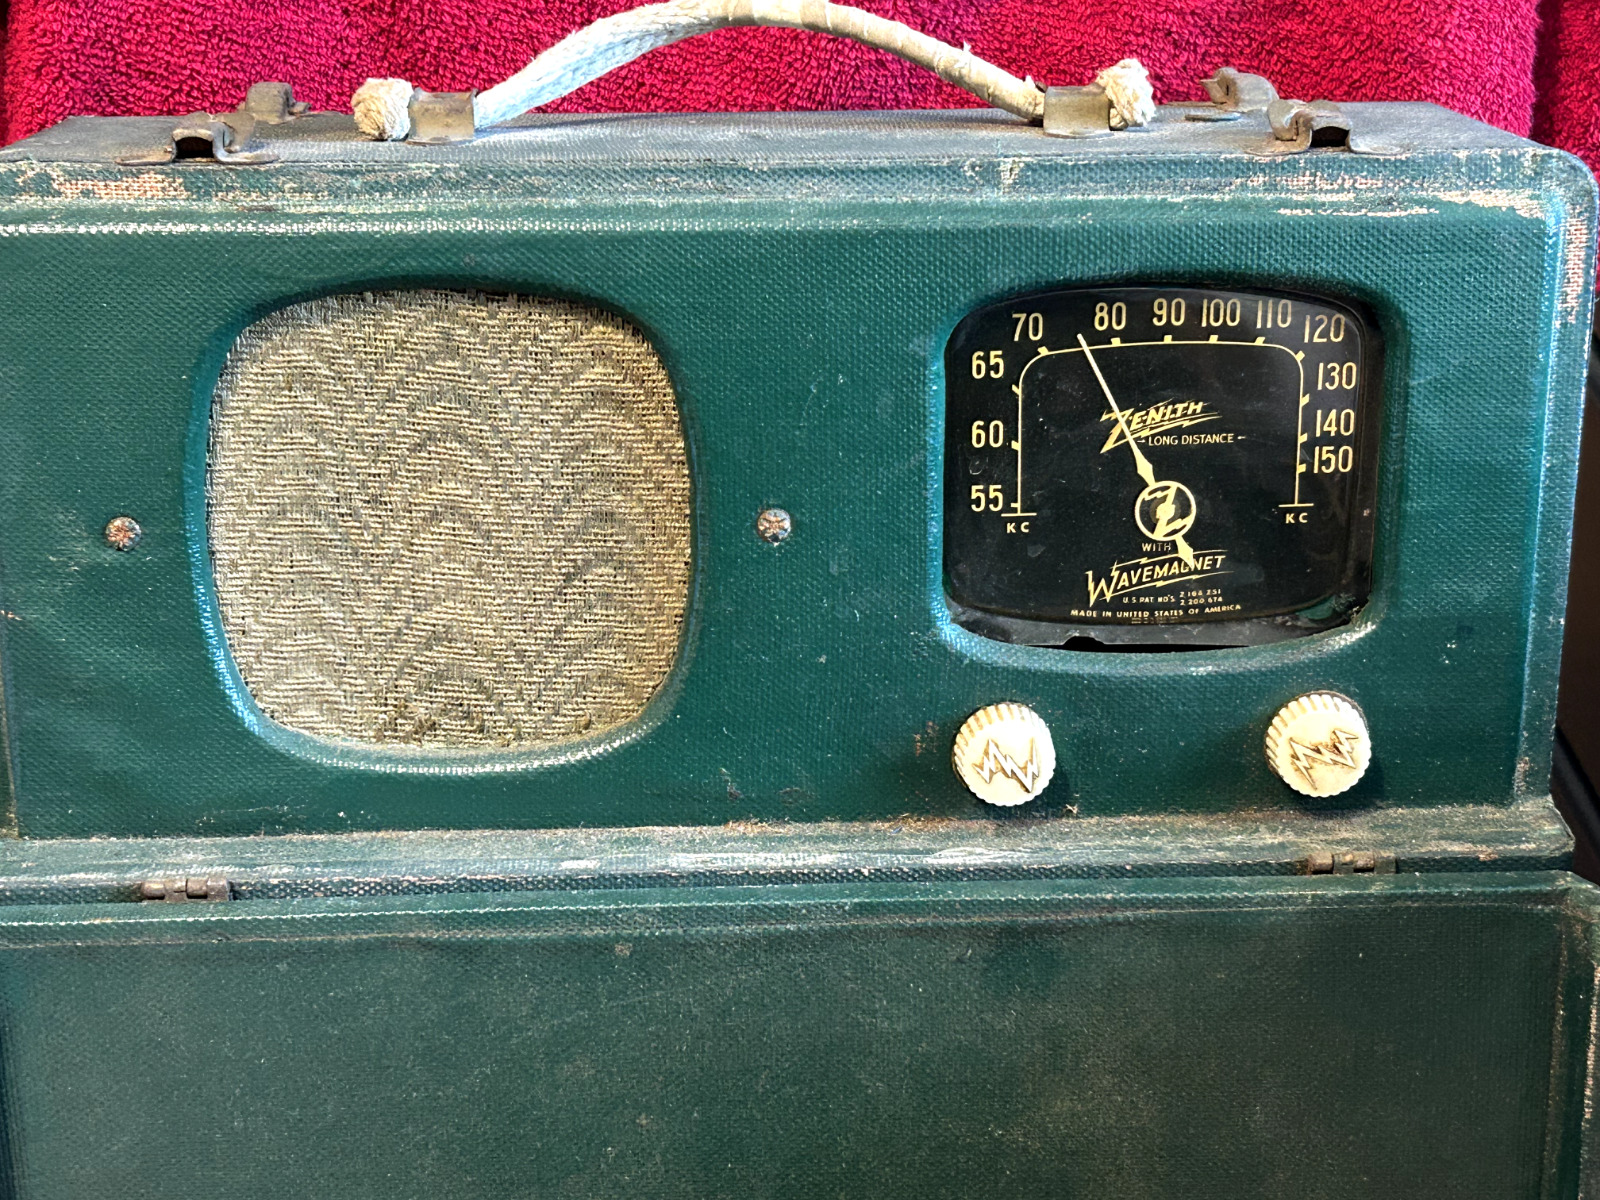 ZENITH MODEL 6G501M LONG DISTANCE WITH WAVEMAGNET RADIO VINTAGE